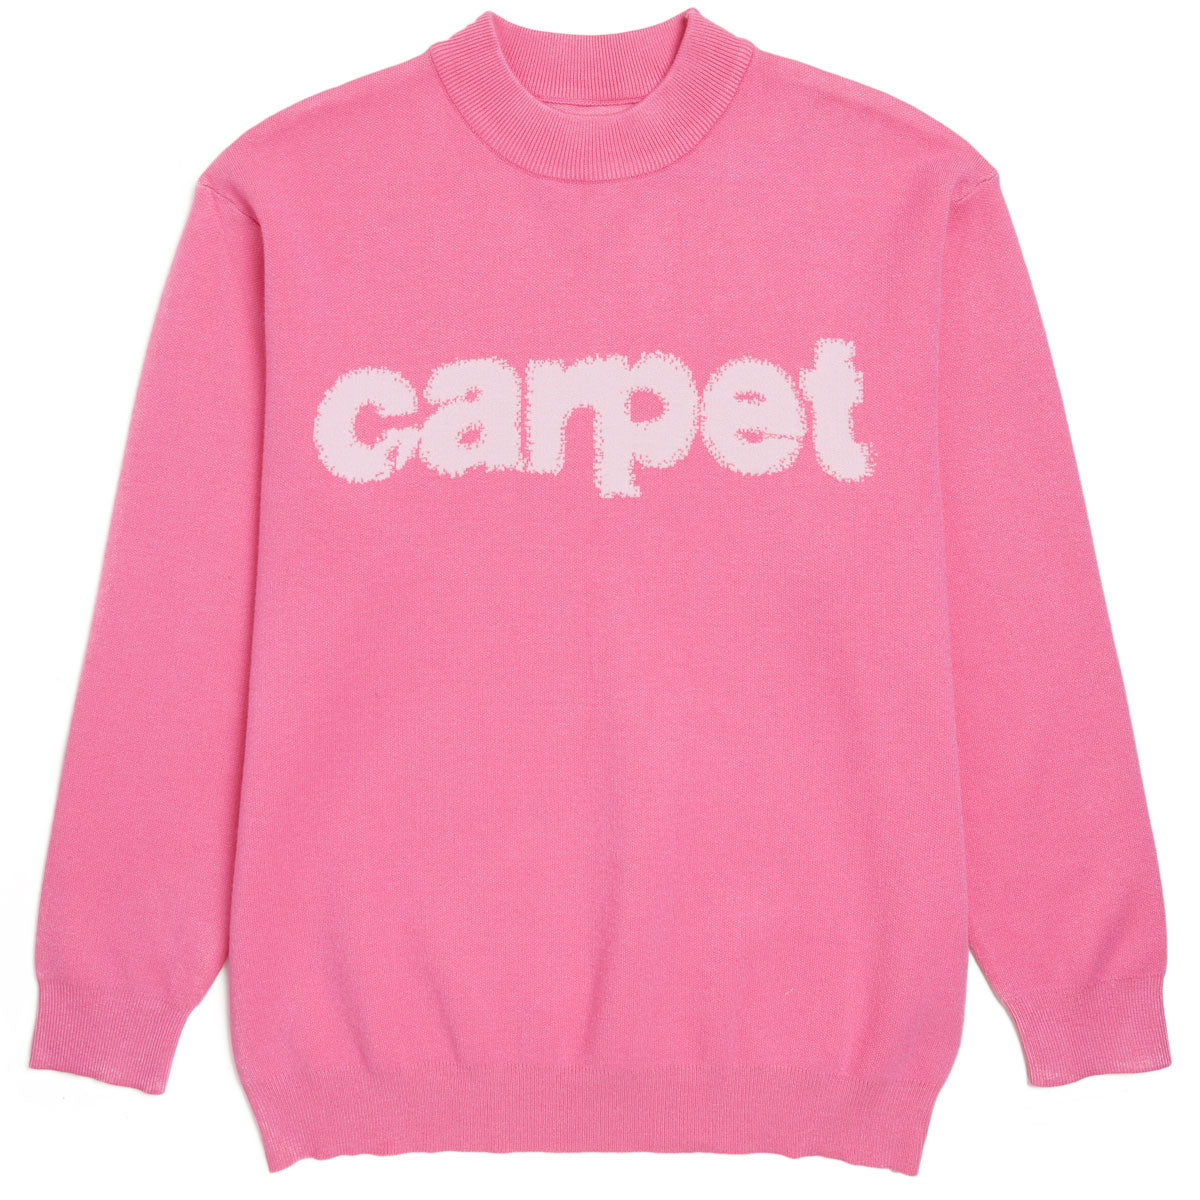 Carpet Company Woven Sweater - Pink image 1